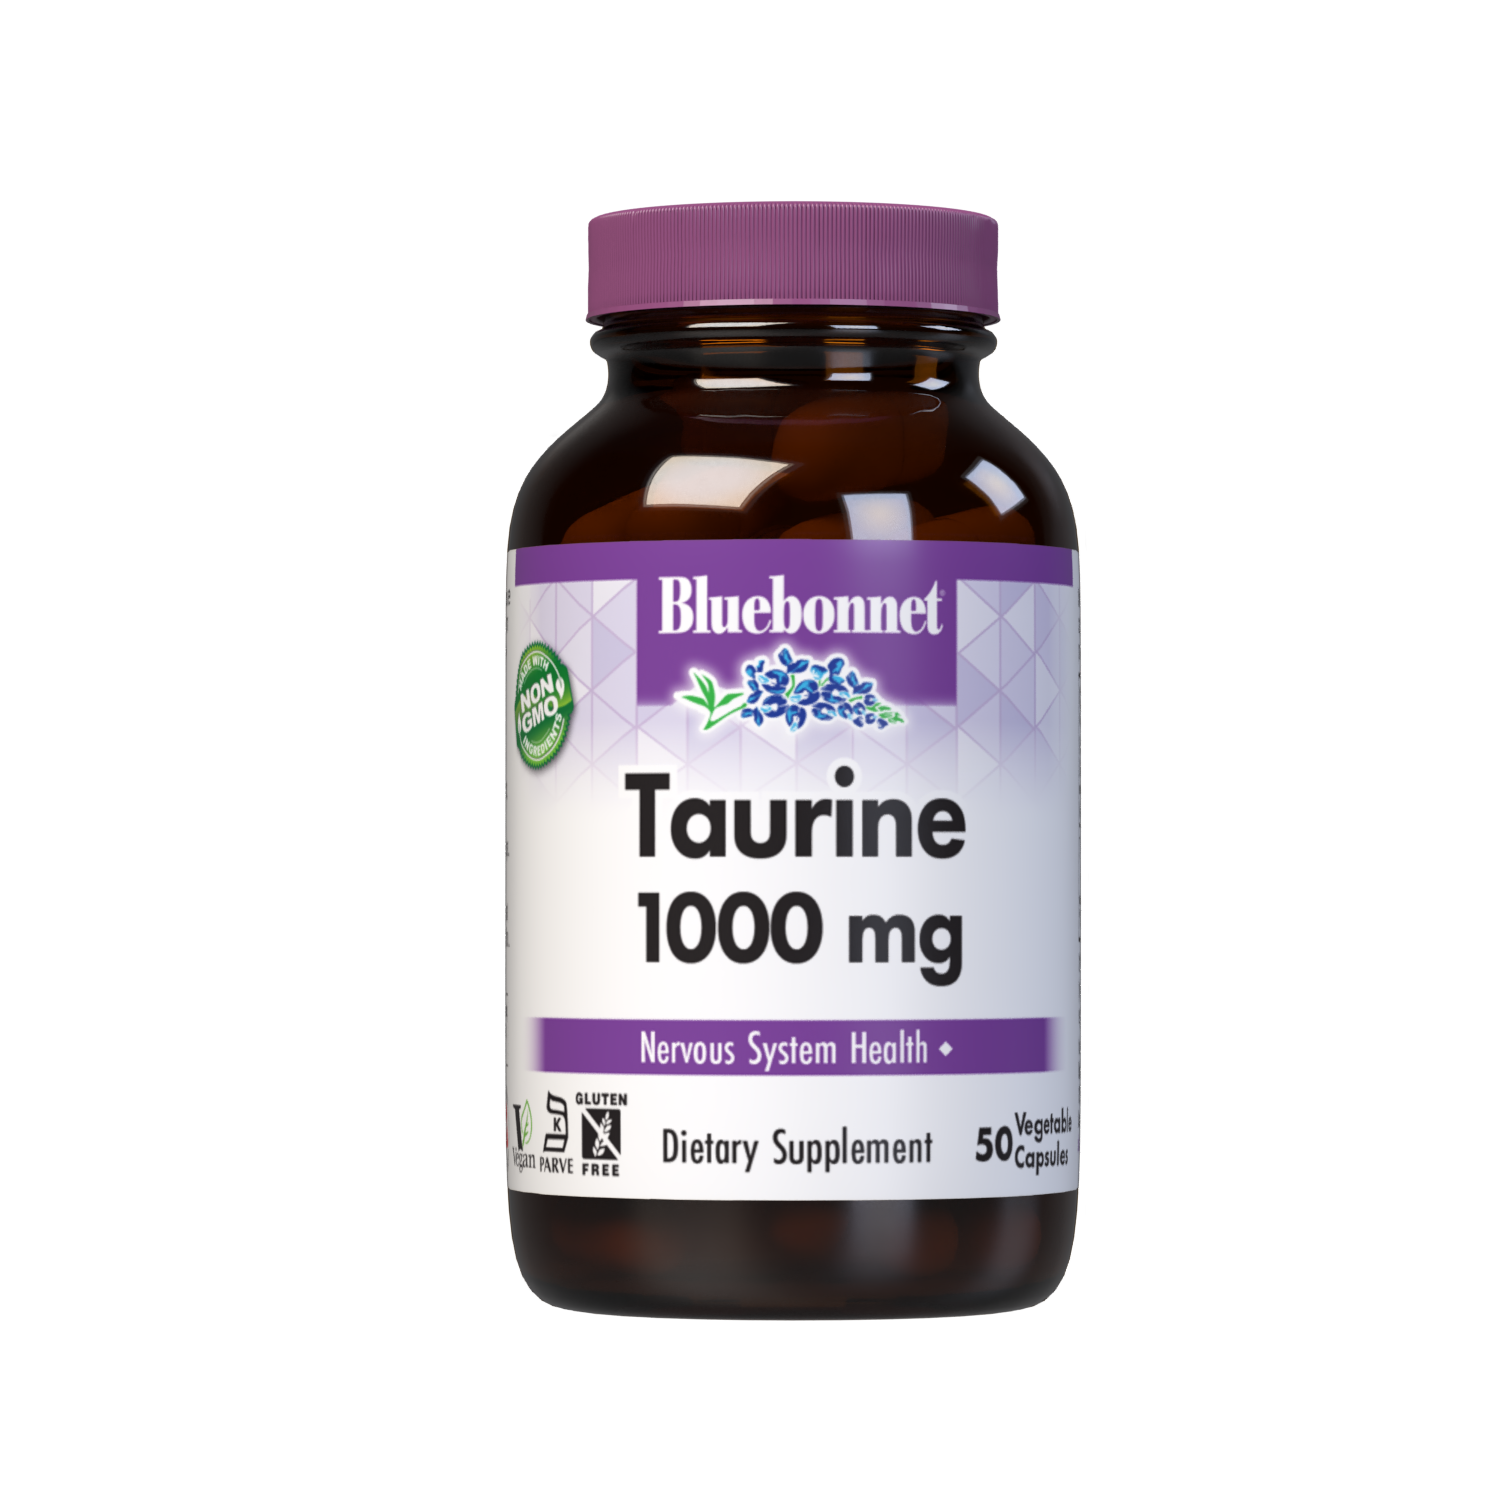 Bluebonnet’s Taurine 1000 mg 50 Vegetable Capsules are formulated with the free-form amino acid taurine from Ajinomoto to hep support nervous system health. #size_50 count